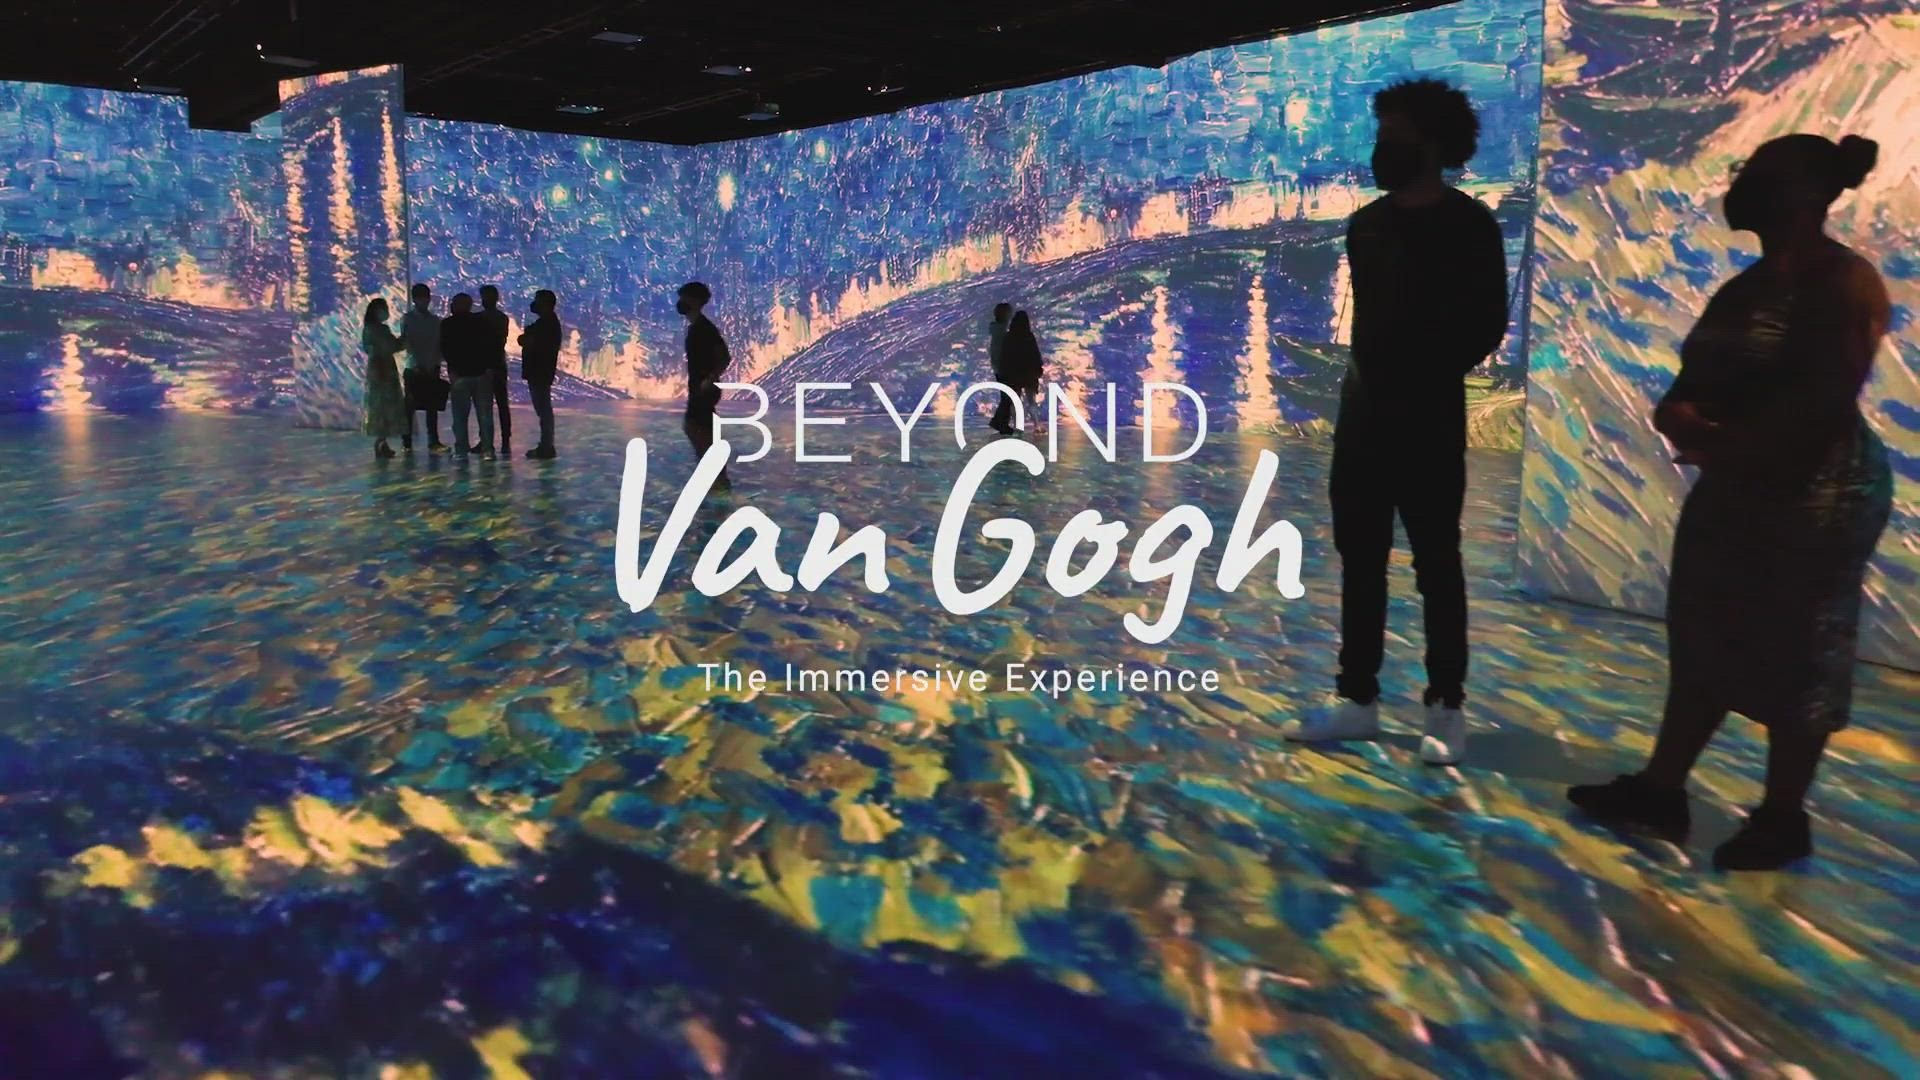 While journeying through Beyond Van Gogh, guests will witness over 300 masterpieces.